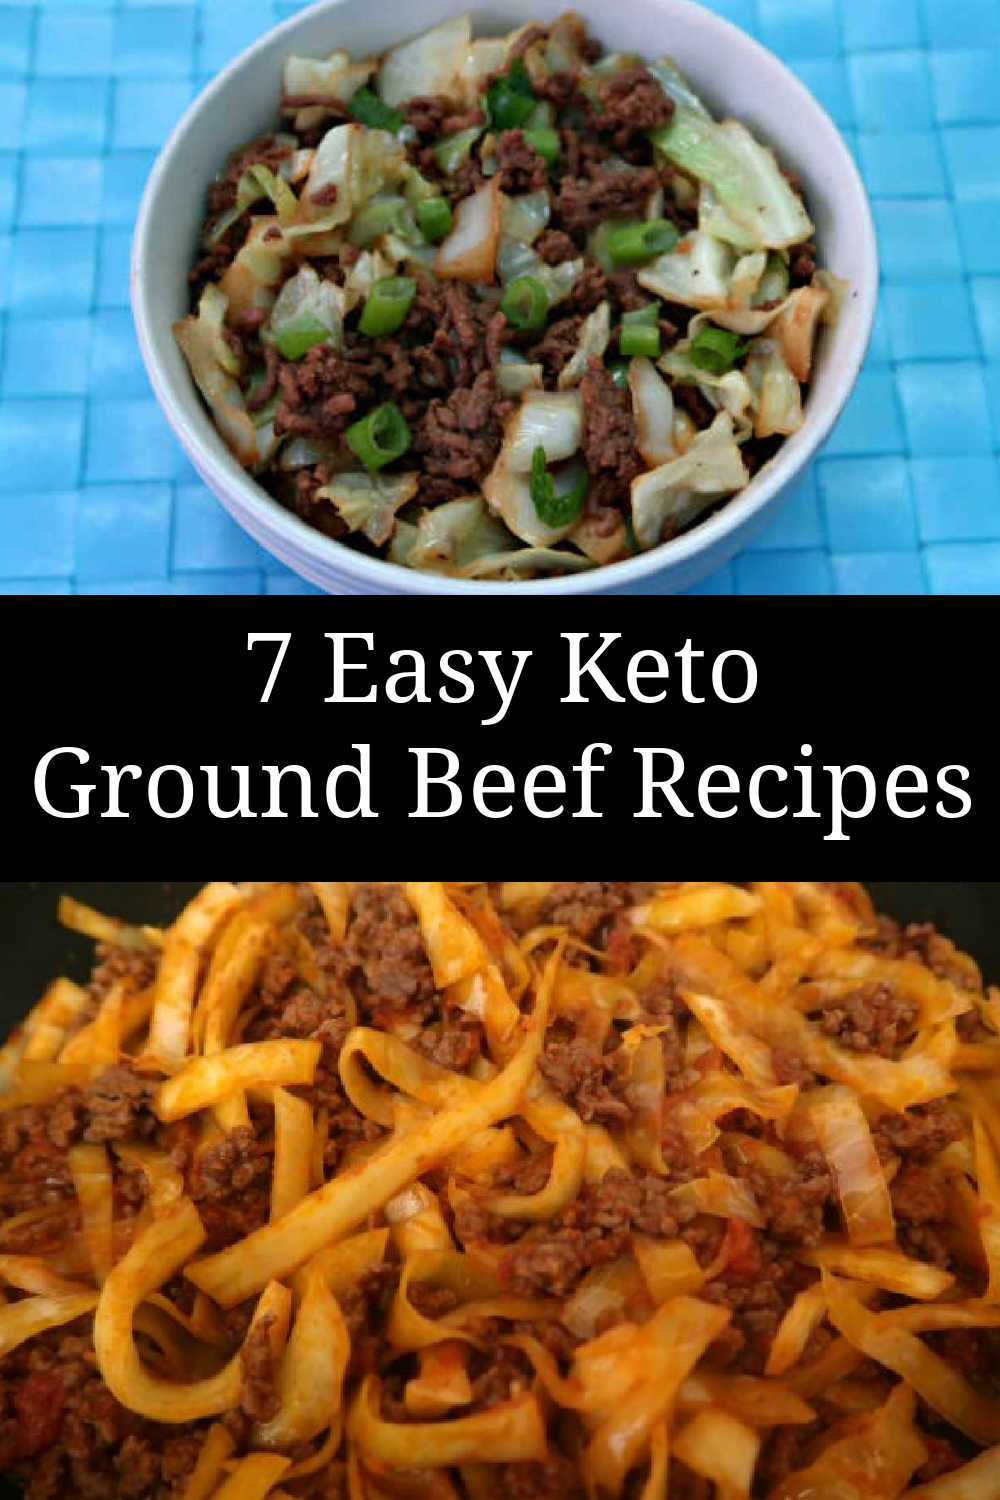 7 Keto Ground Beef Recipes - Best Easy Low Carb Dinner Recipe Ideas